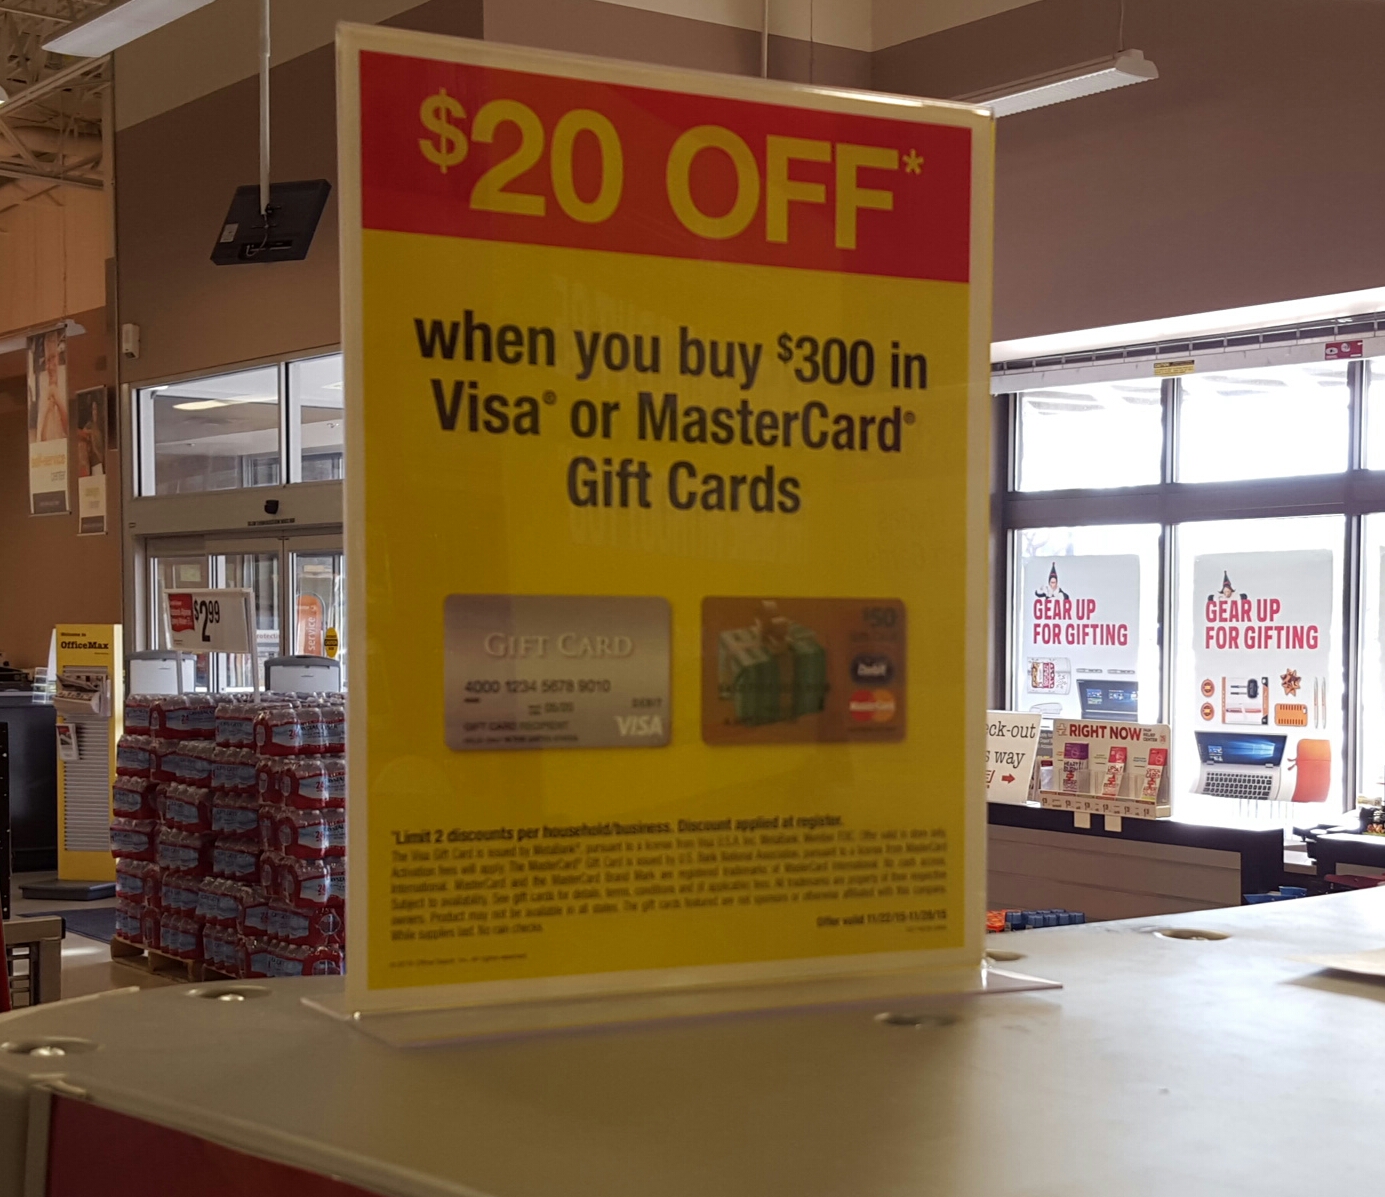 15-instant-rebate-on-300-in-visa-gift-cards-at-officemax